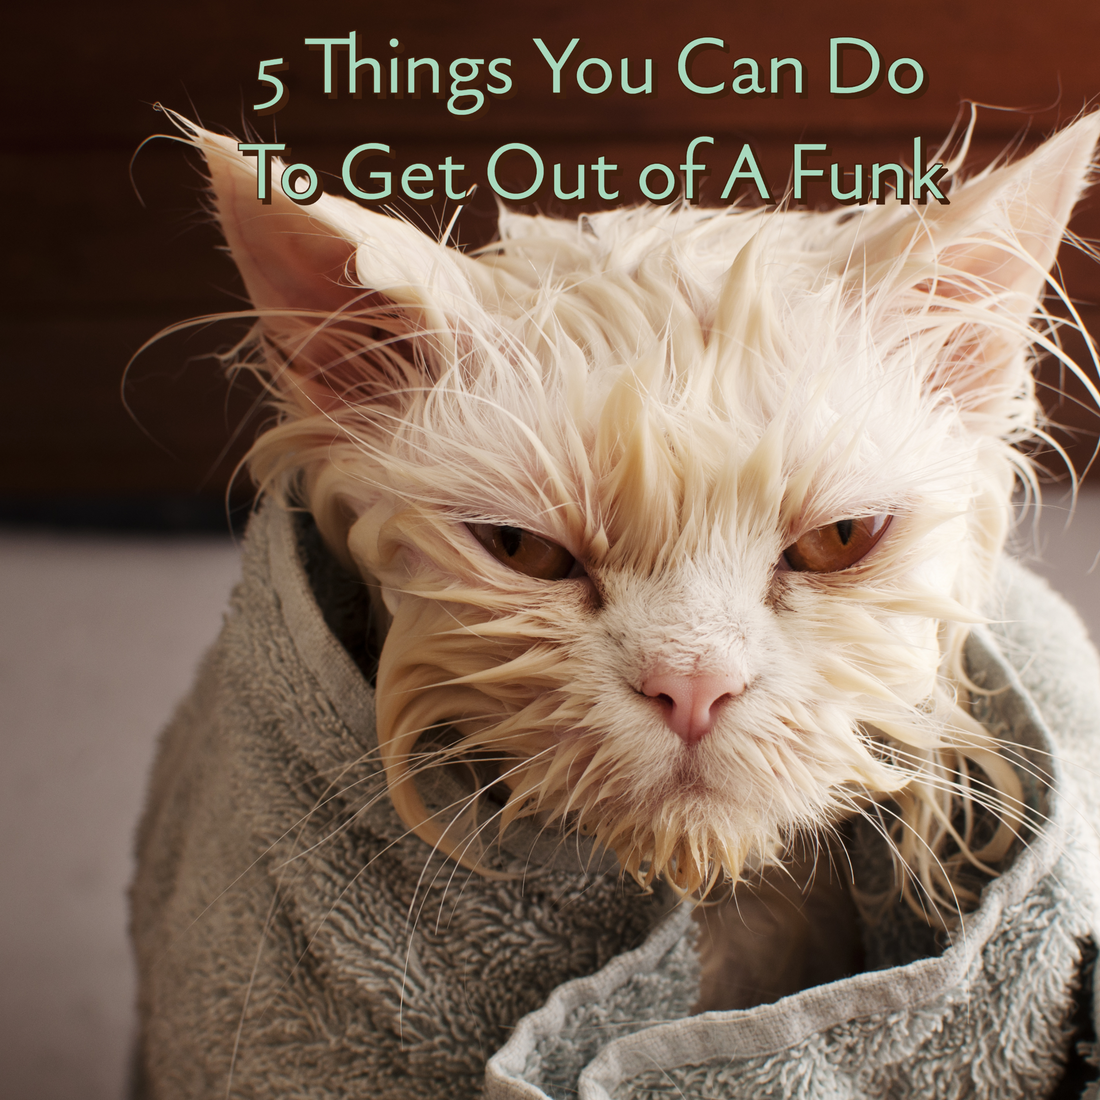 5 Things You Can Do To Get Out of A Funk